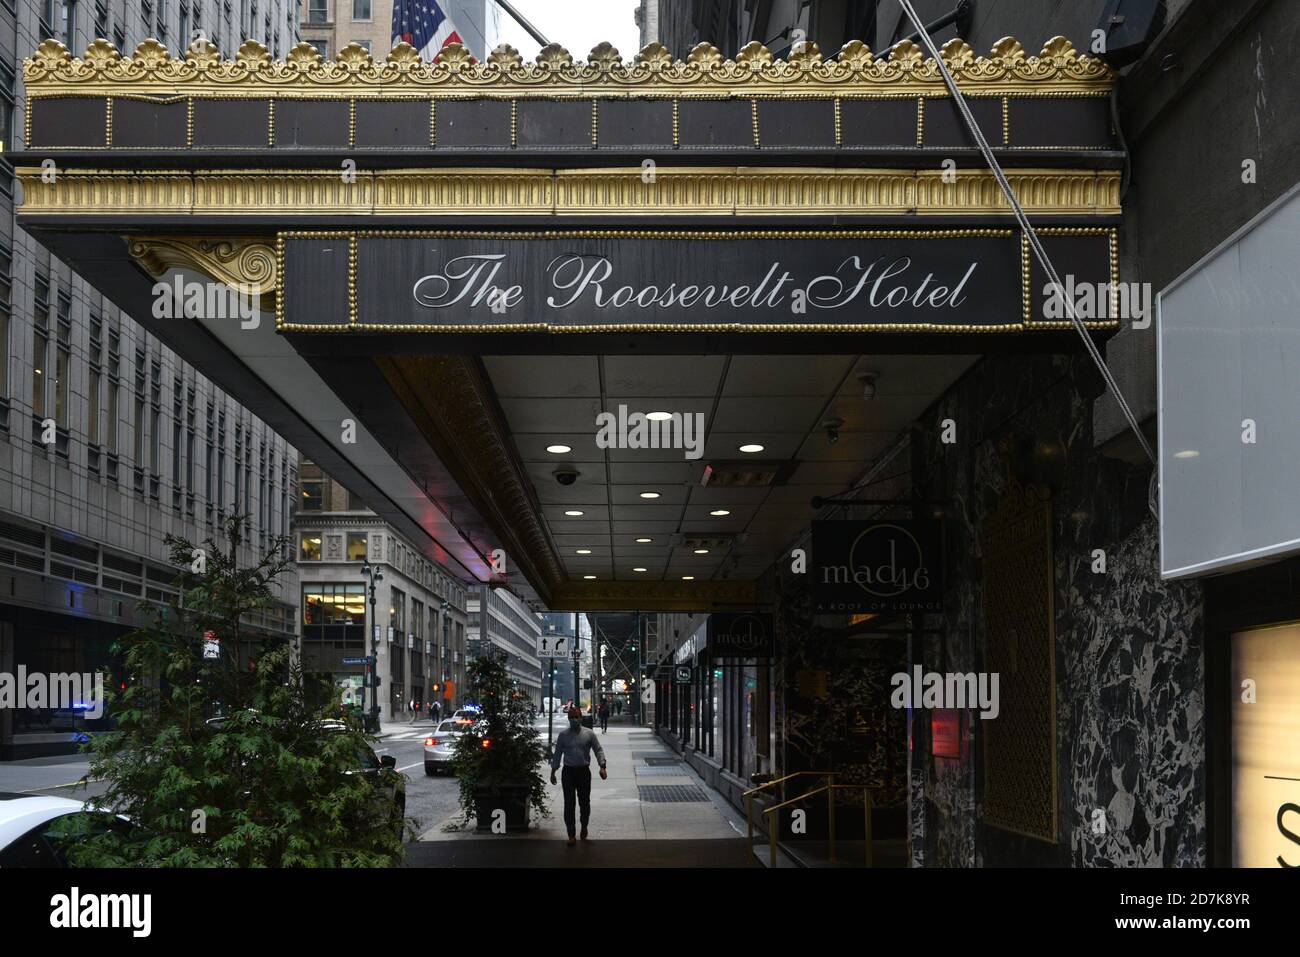 An exterior view of the Roosevelt Hotel on October 22, 2020 in New York. The Roosevelt Hotel, one of New York’s oldest and most storied hotels, will c Stock Photo